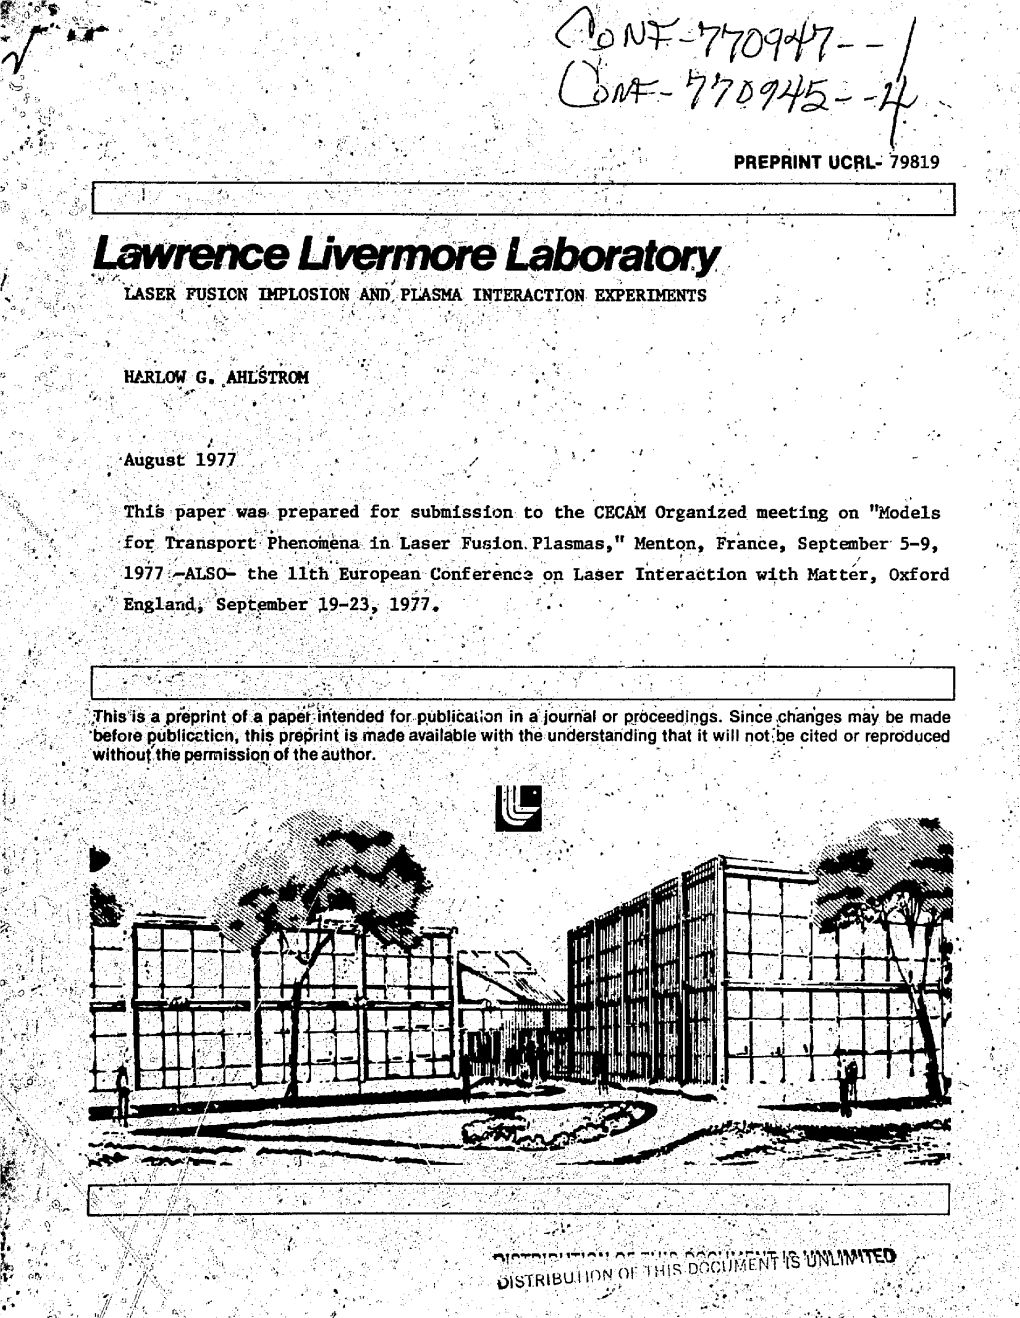 Lawrence Livermore Laboratory LASER FUSION IMPLOSION AM)! PLASMA INTERACTION EXPERIMENTS